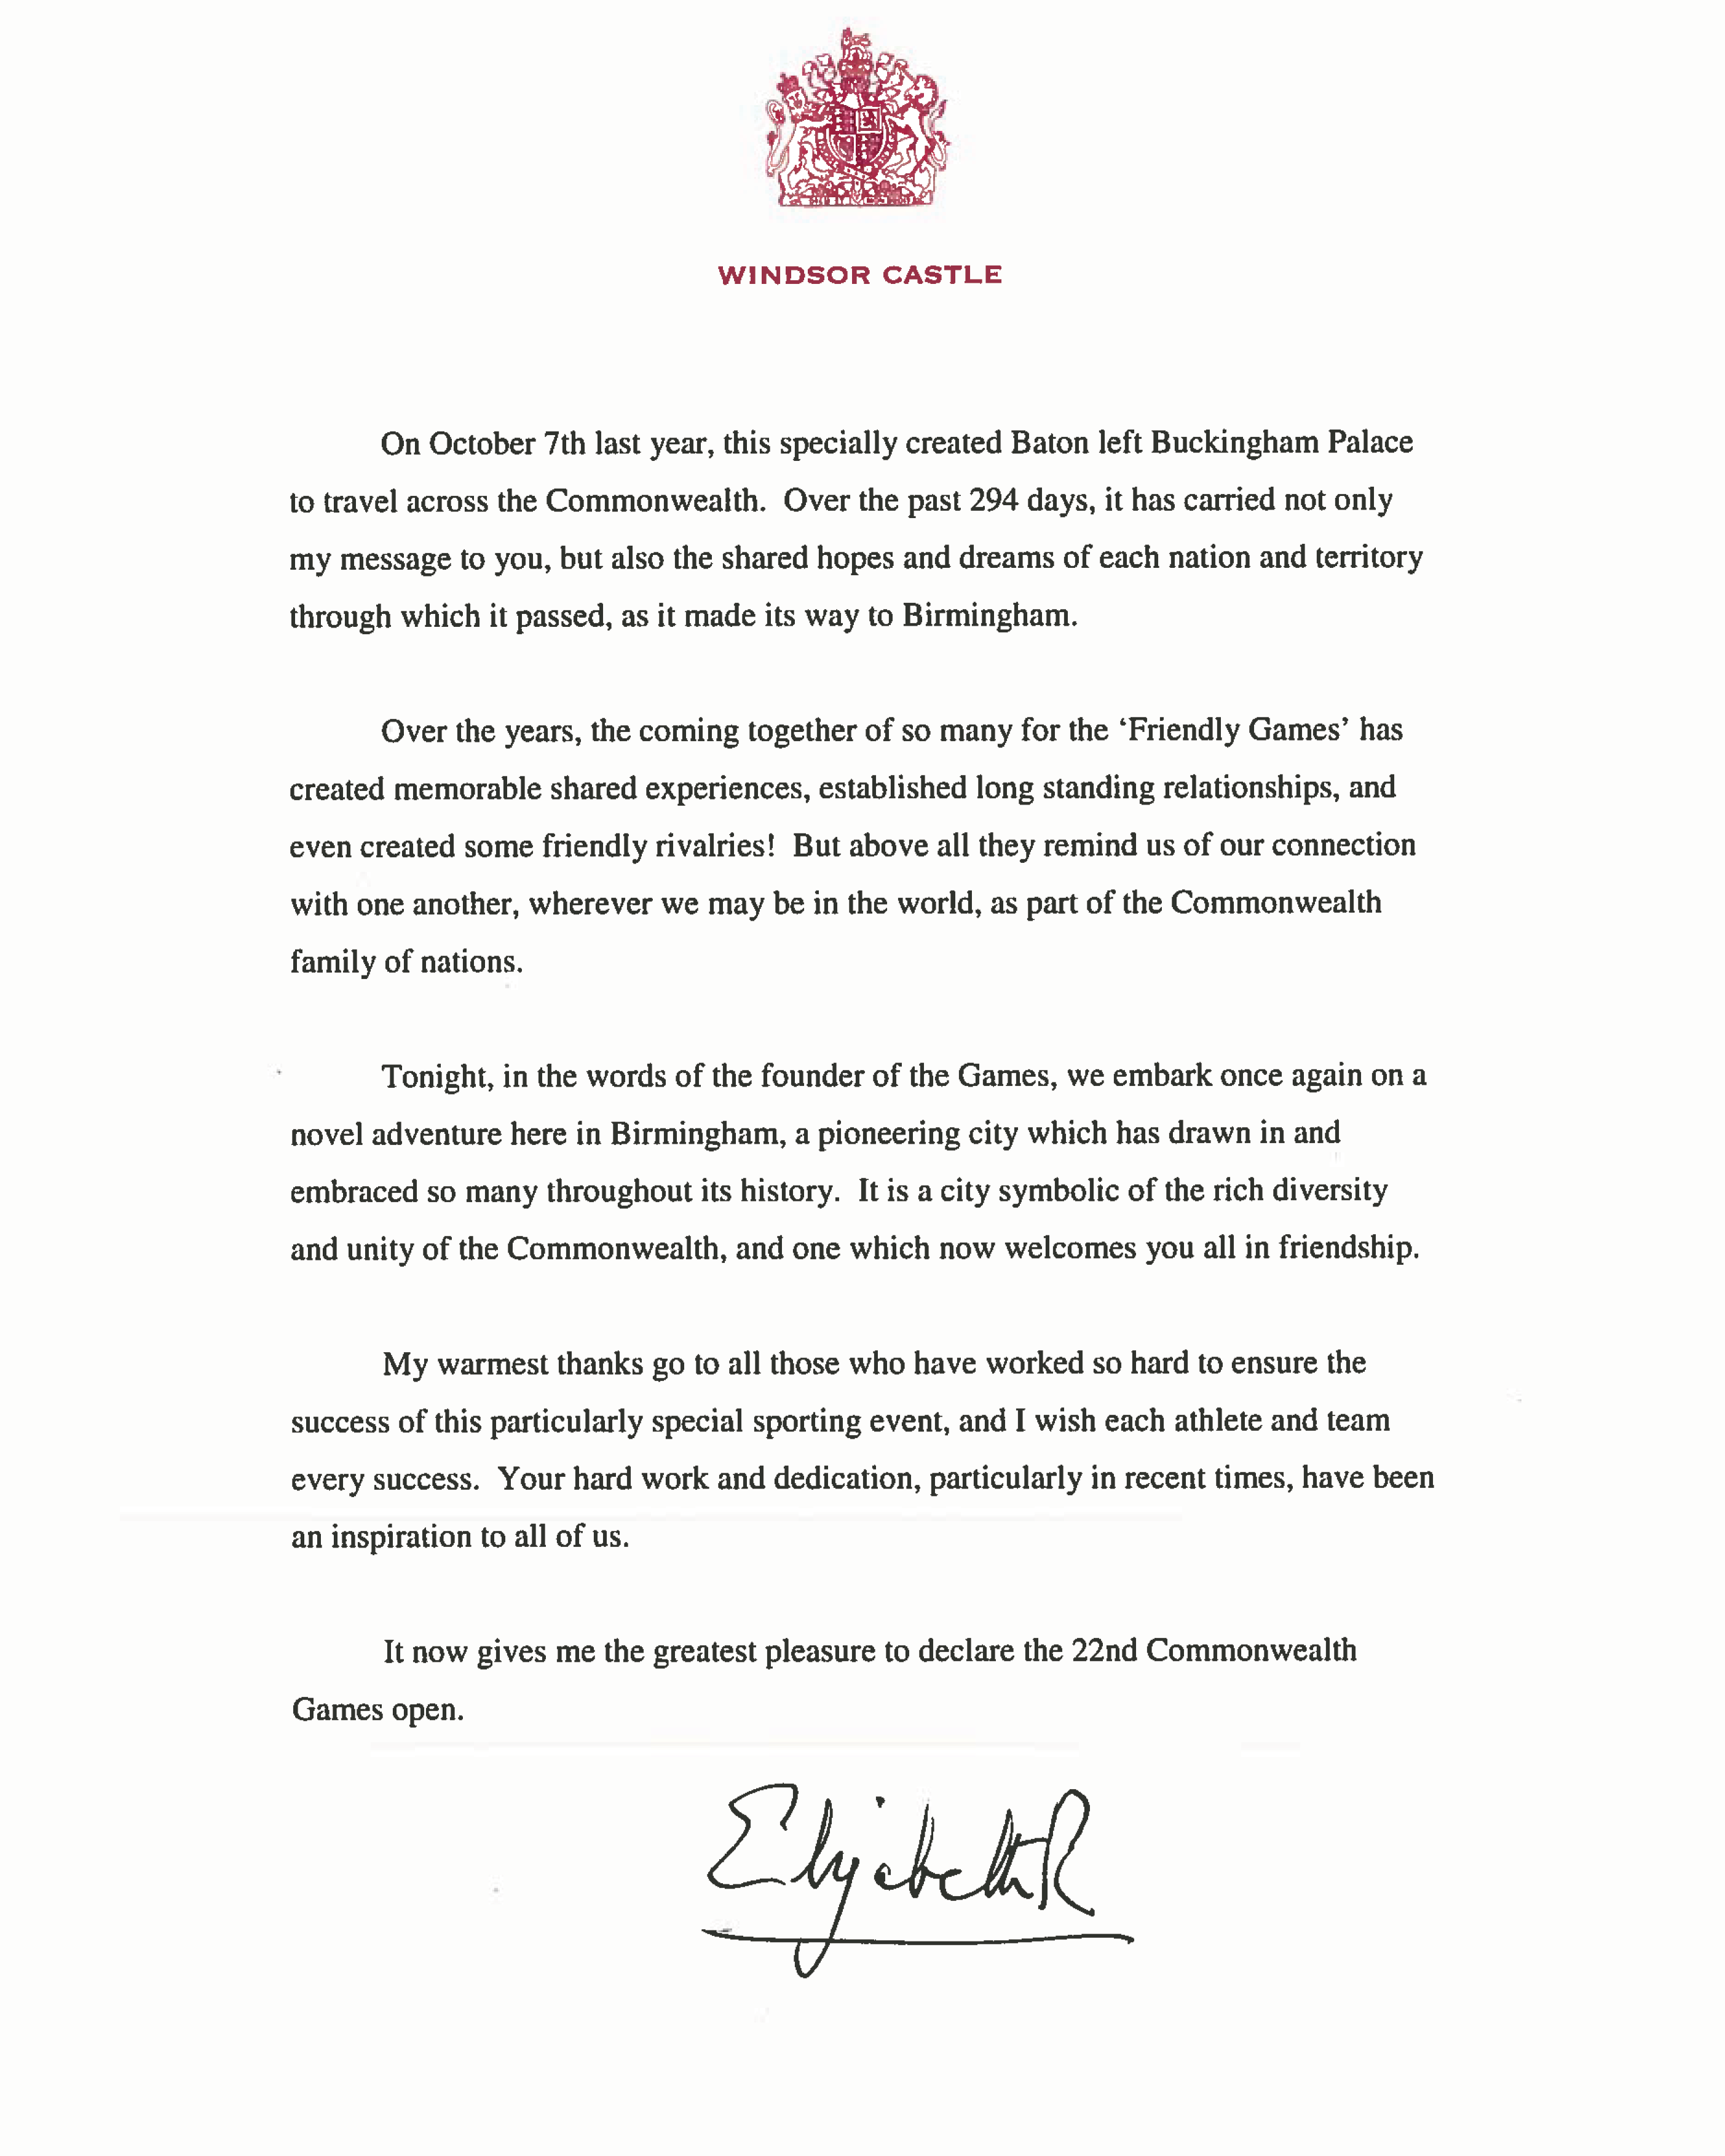 The Queen's message for the Commonwealth Games